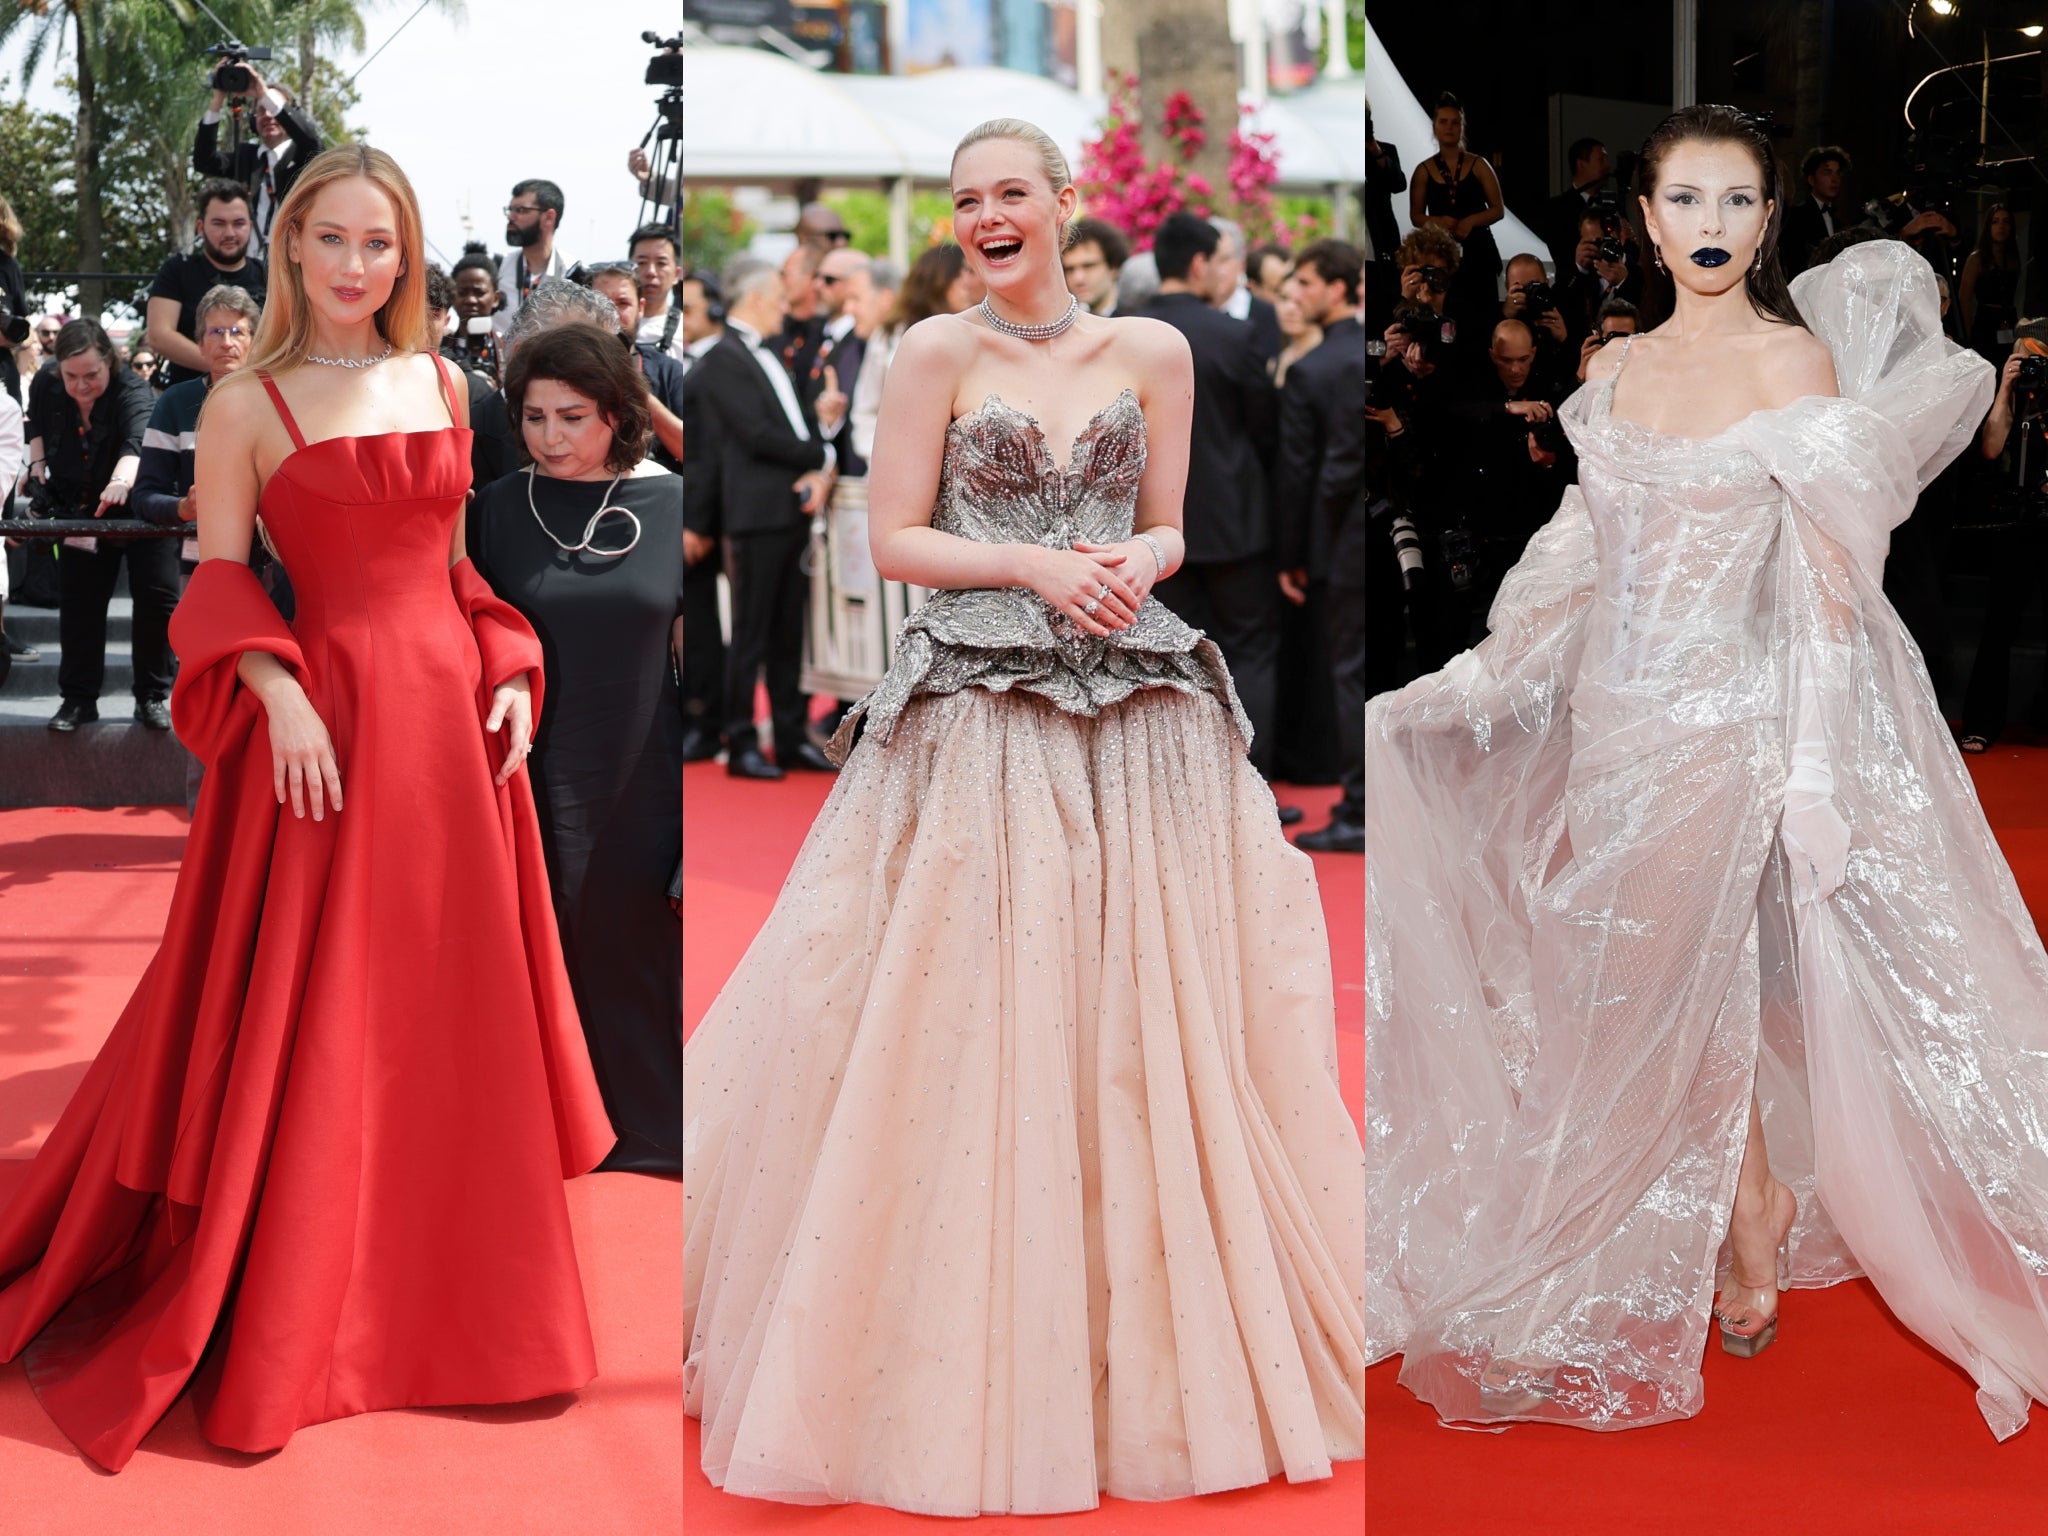 From Elle Fanning to Jennifer Lawrence All the bestdressed stars at